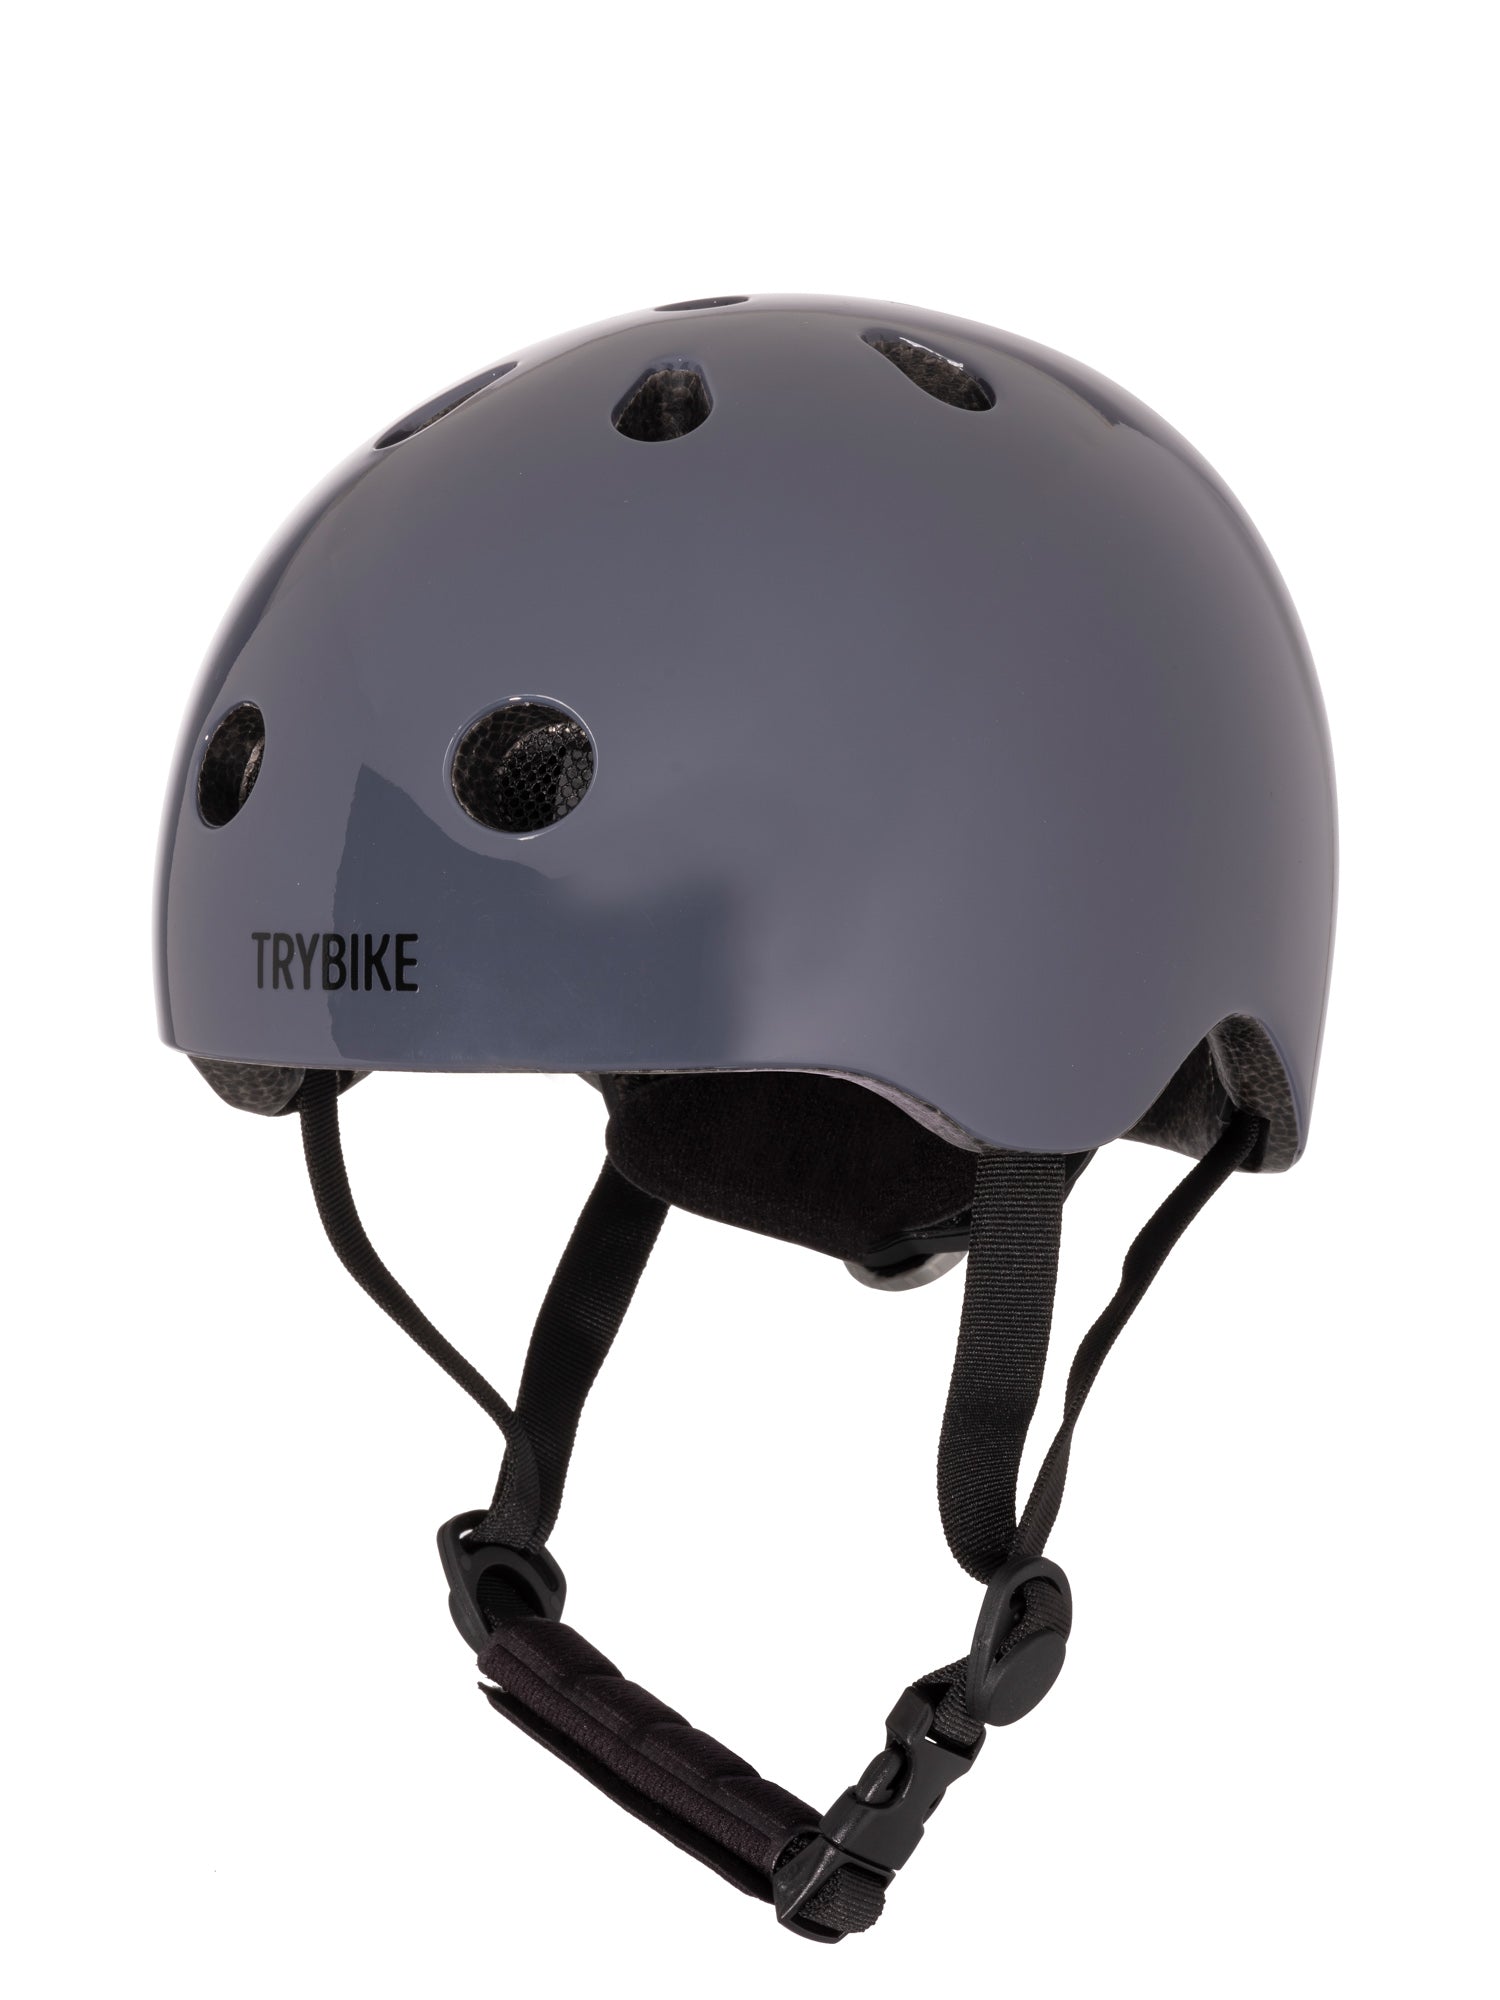 Casque gris anthracite taille XS - TRYBIKE CoCo13 XS 8719325440003